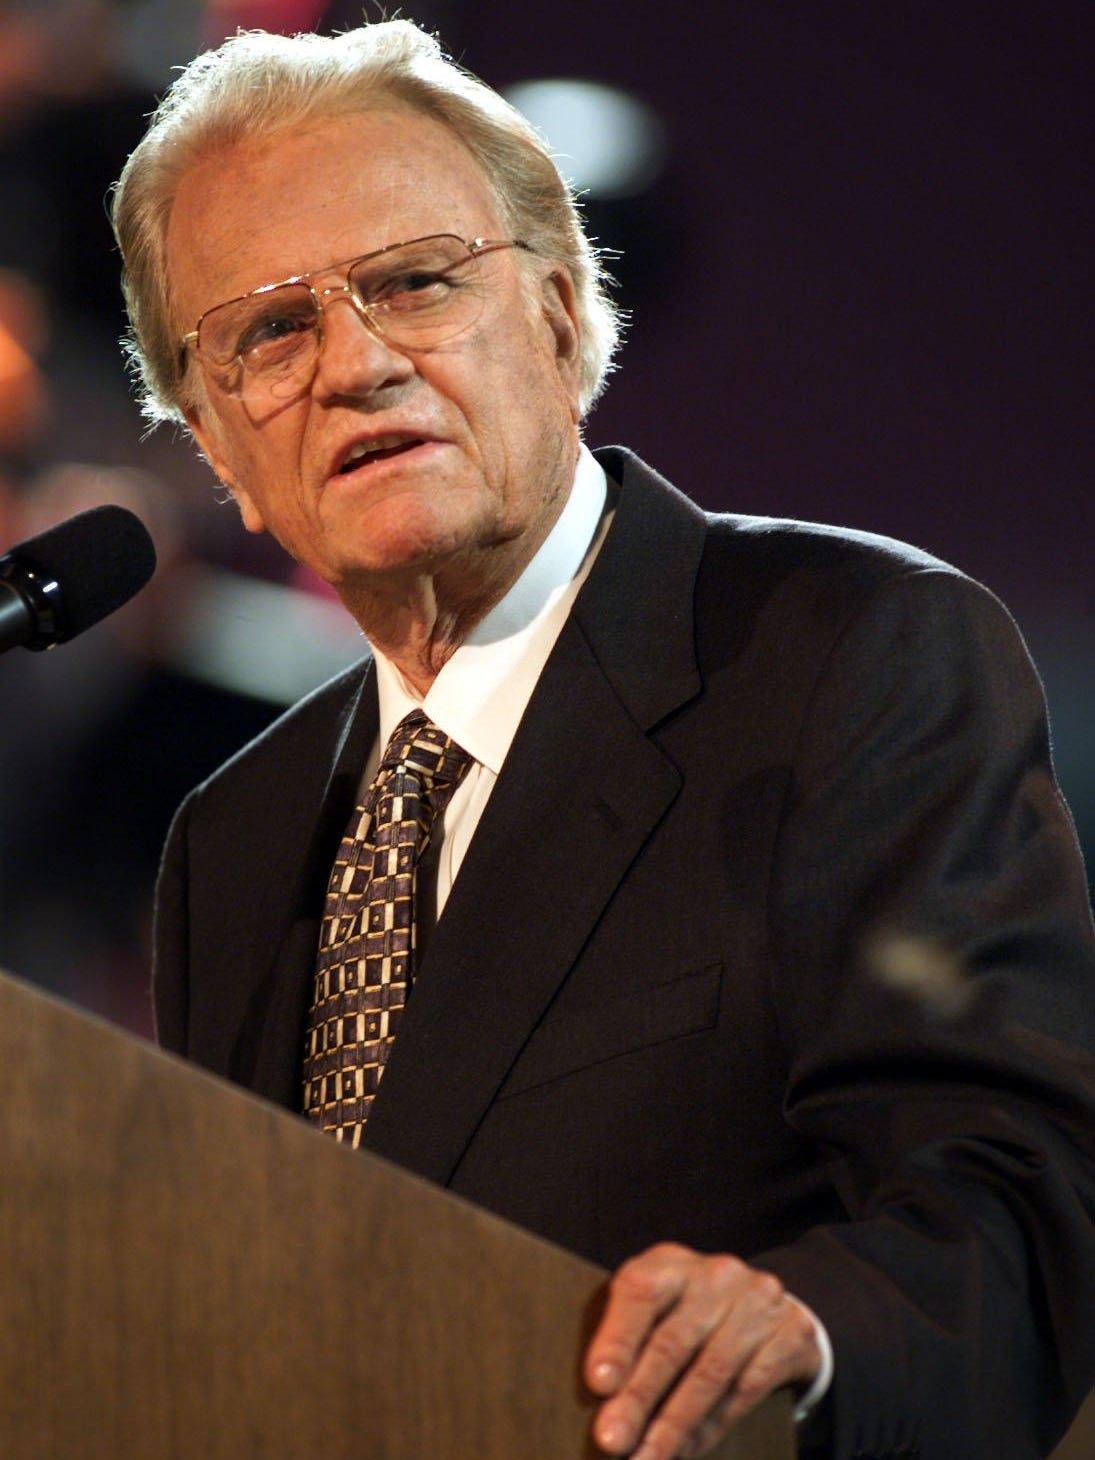 DOWNLOAD MP3: ARE YOU OFFENDED BY THE CROSS By Evangelist Billy Graham(sermon) 4